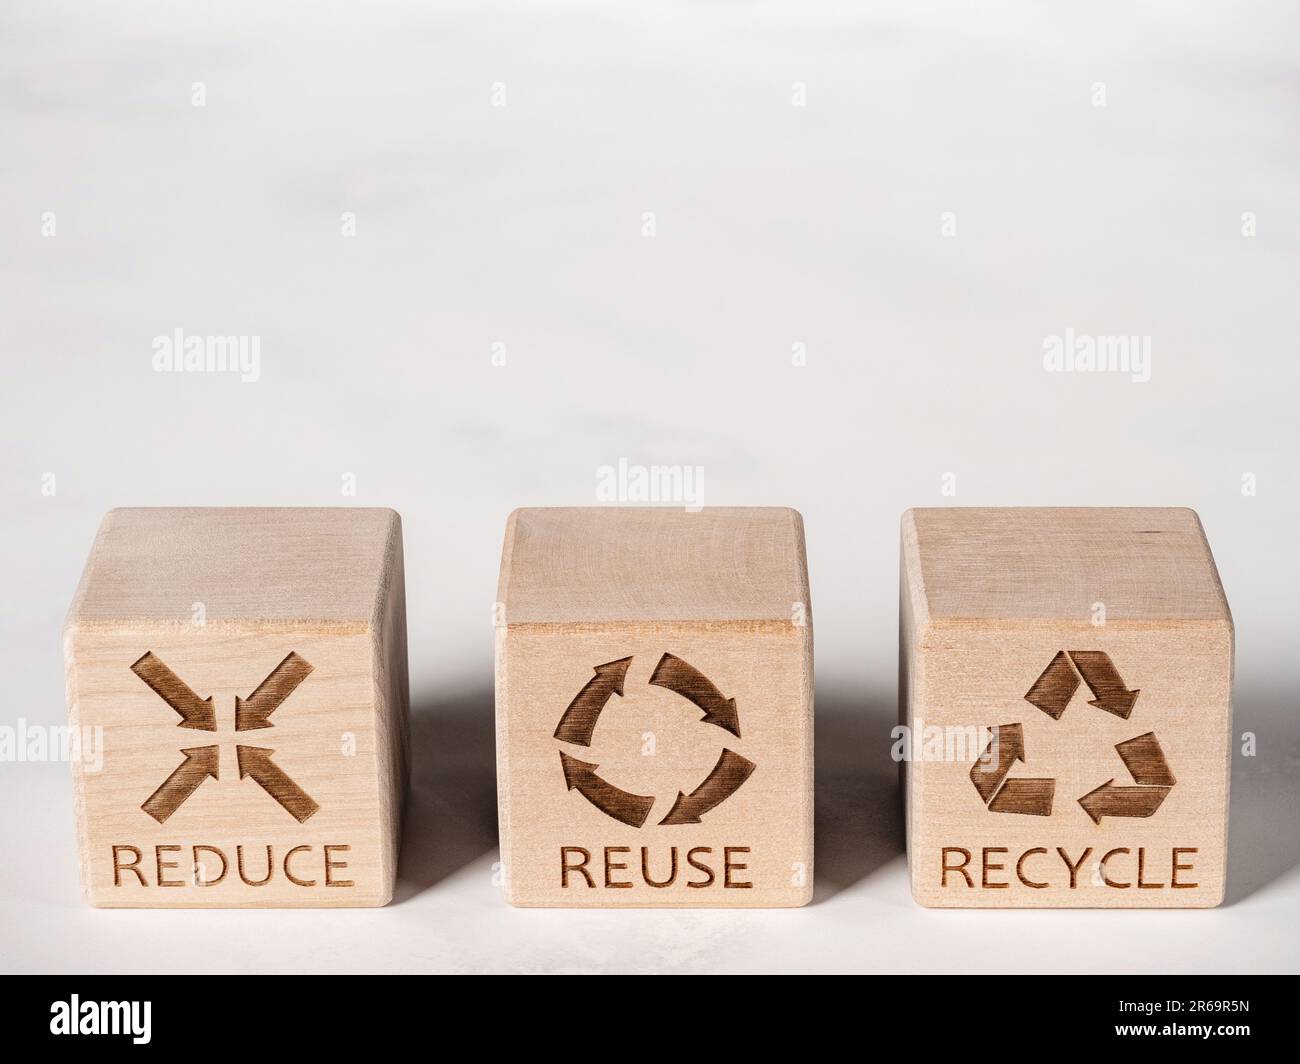 Reduce, Reuse, and Recycle symbols as a resources conservation concept Stock Photo